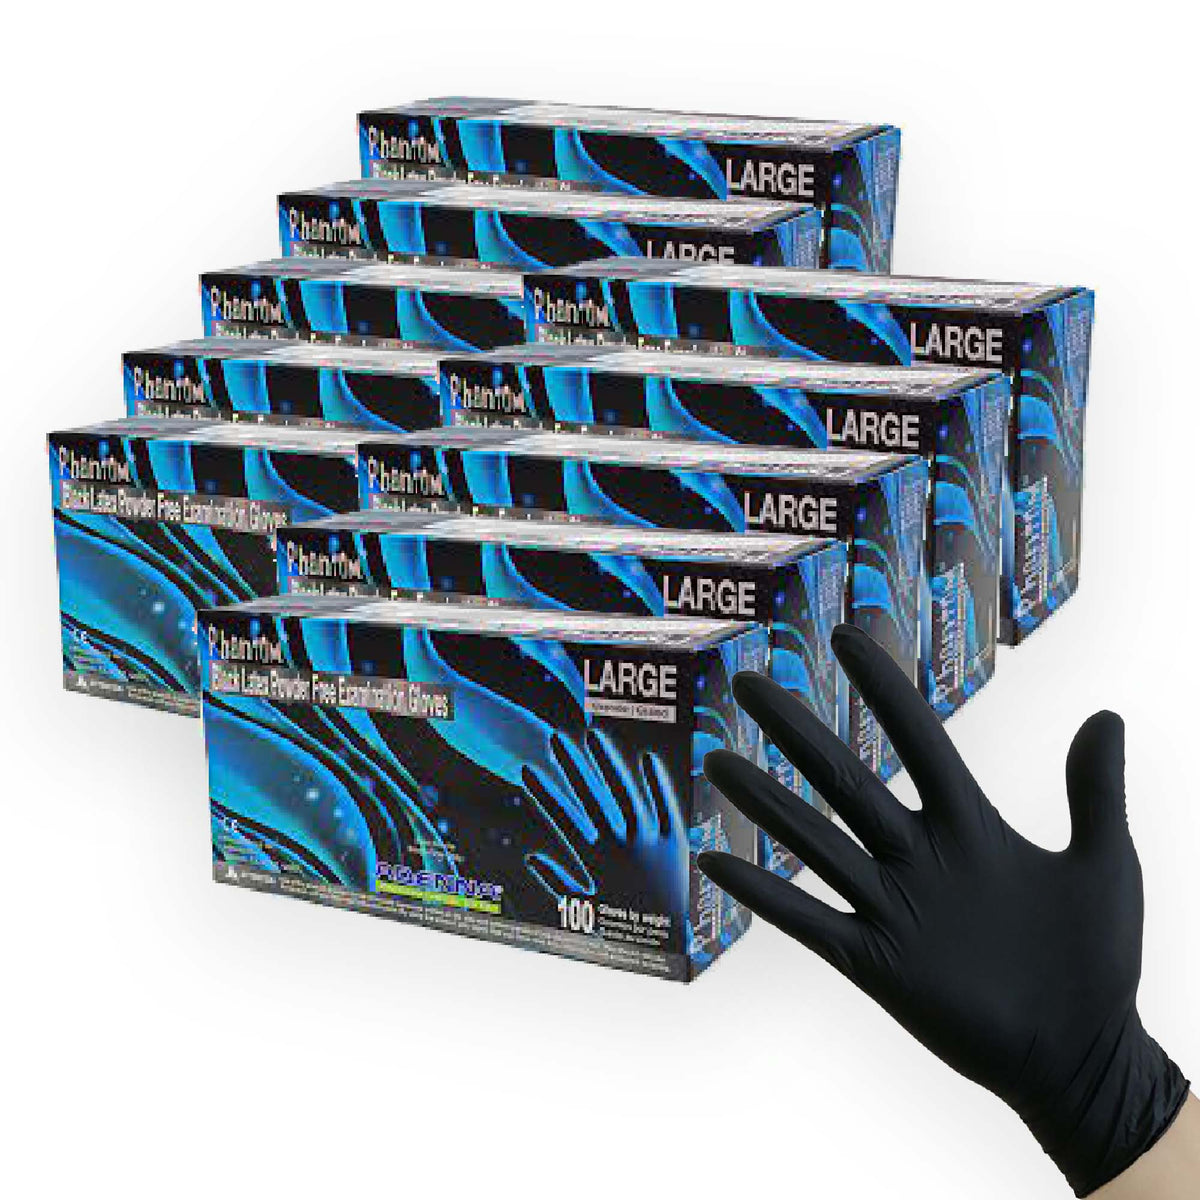 10 boxes of Phantom Black Nitrile Gloves (Examination Grade and Powder Free) in 5 mil thickness